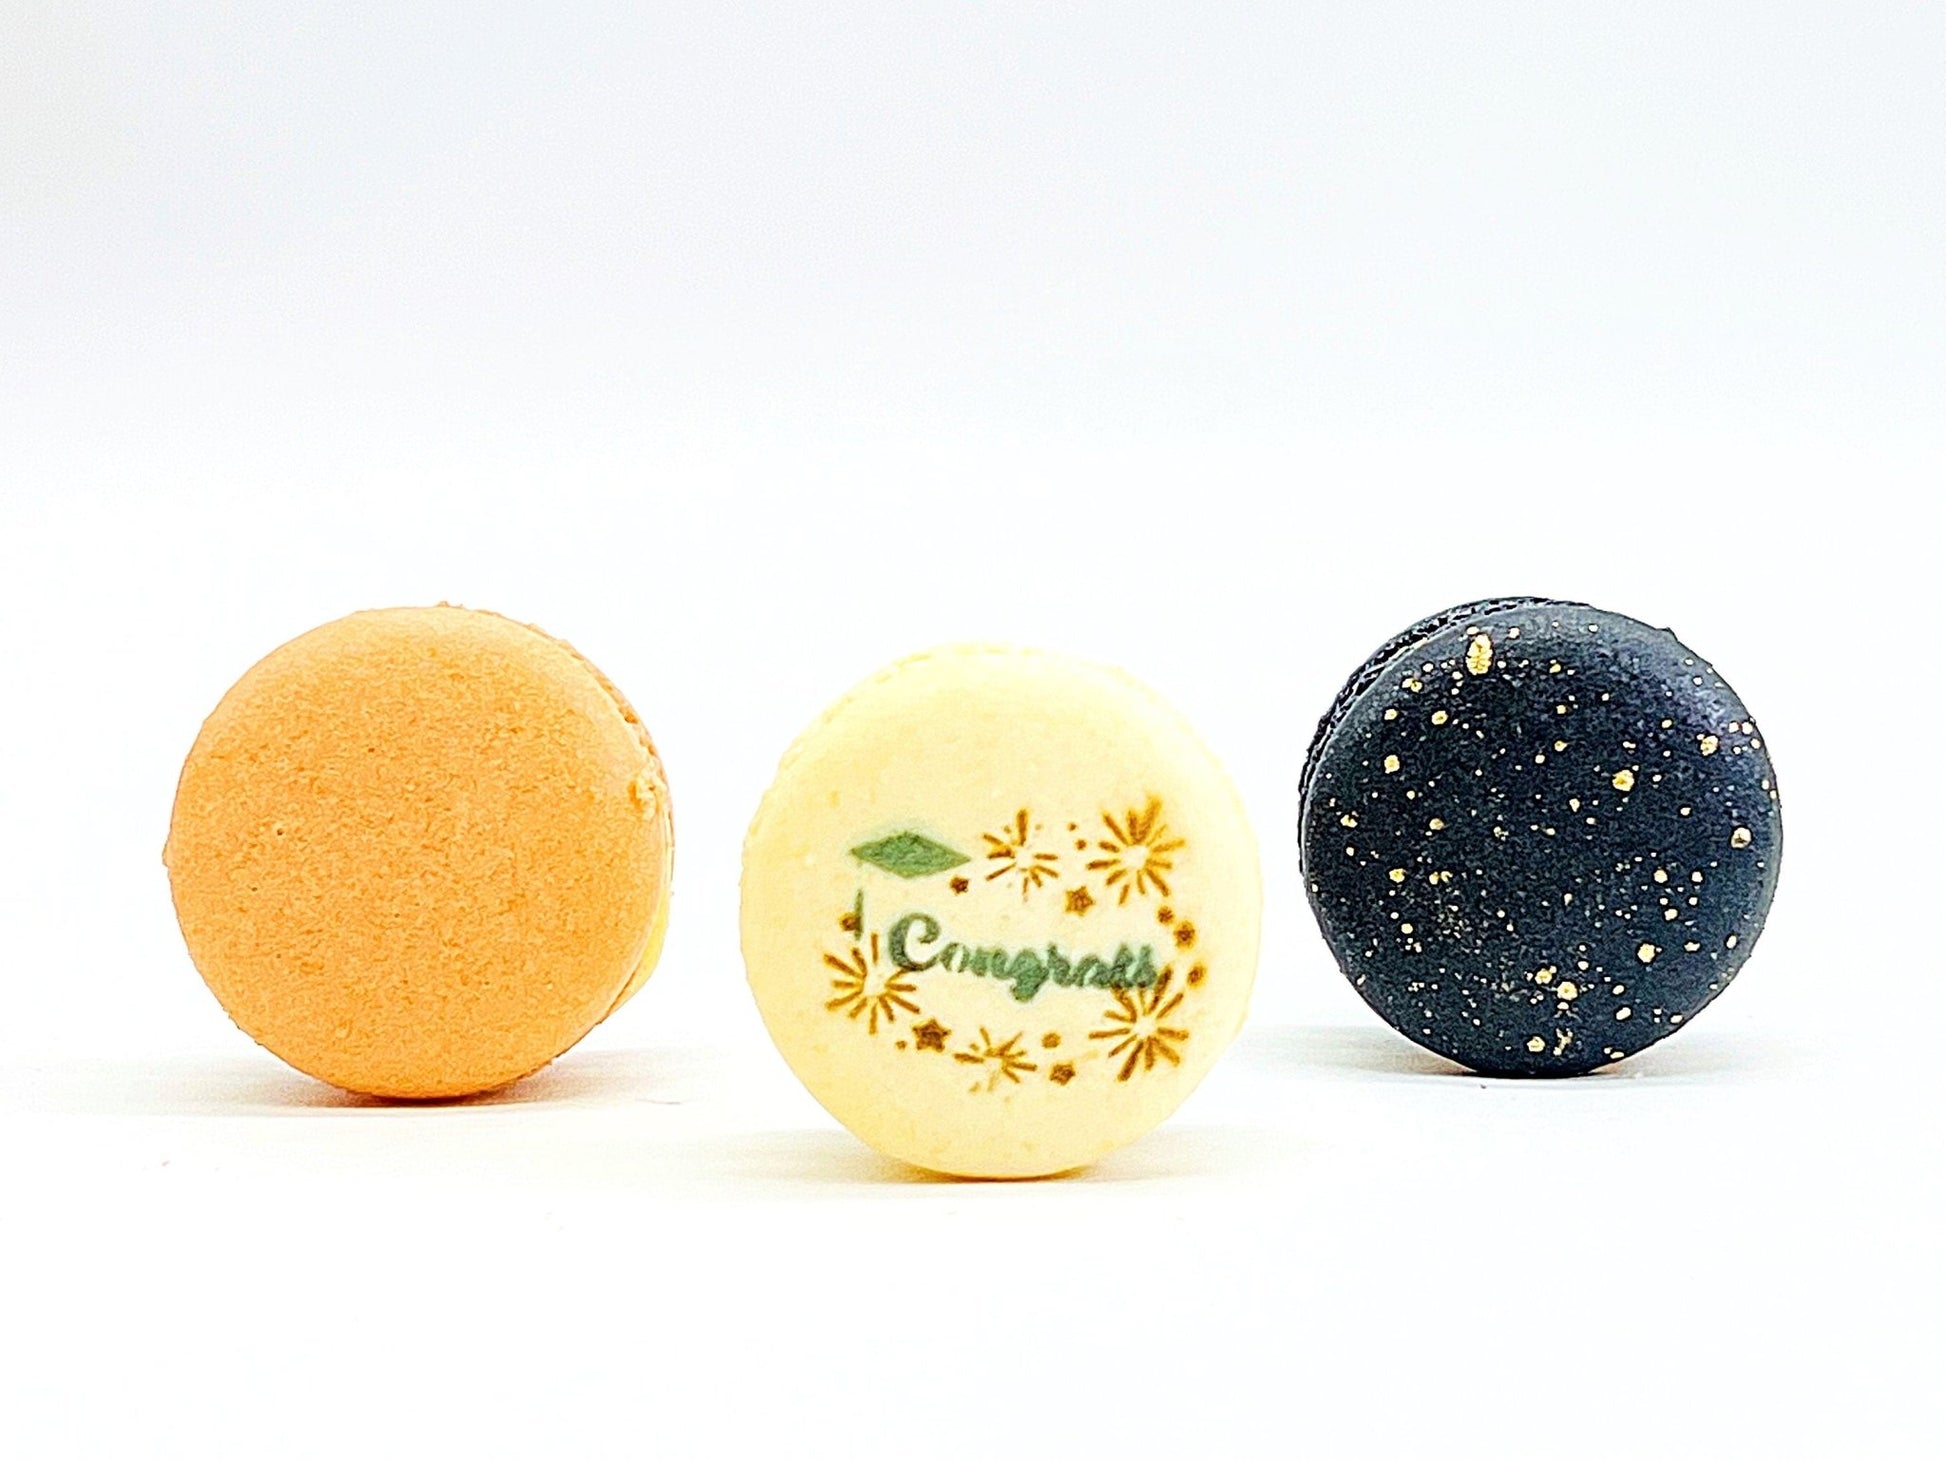 Congrats French Macaron Box (Black / Warm Brown) | Available in 6 & 12 Pack - Macaron CentraleBlackberry6 Pack